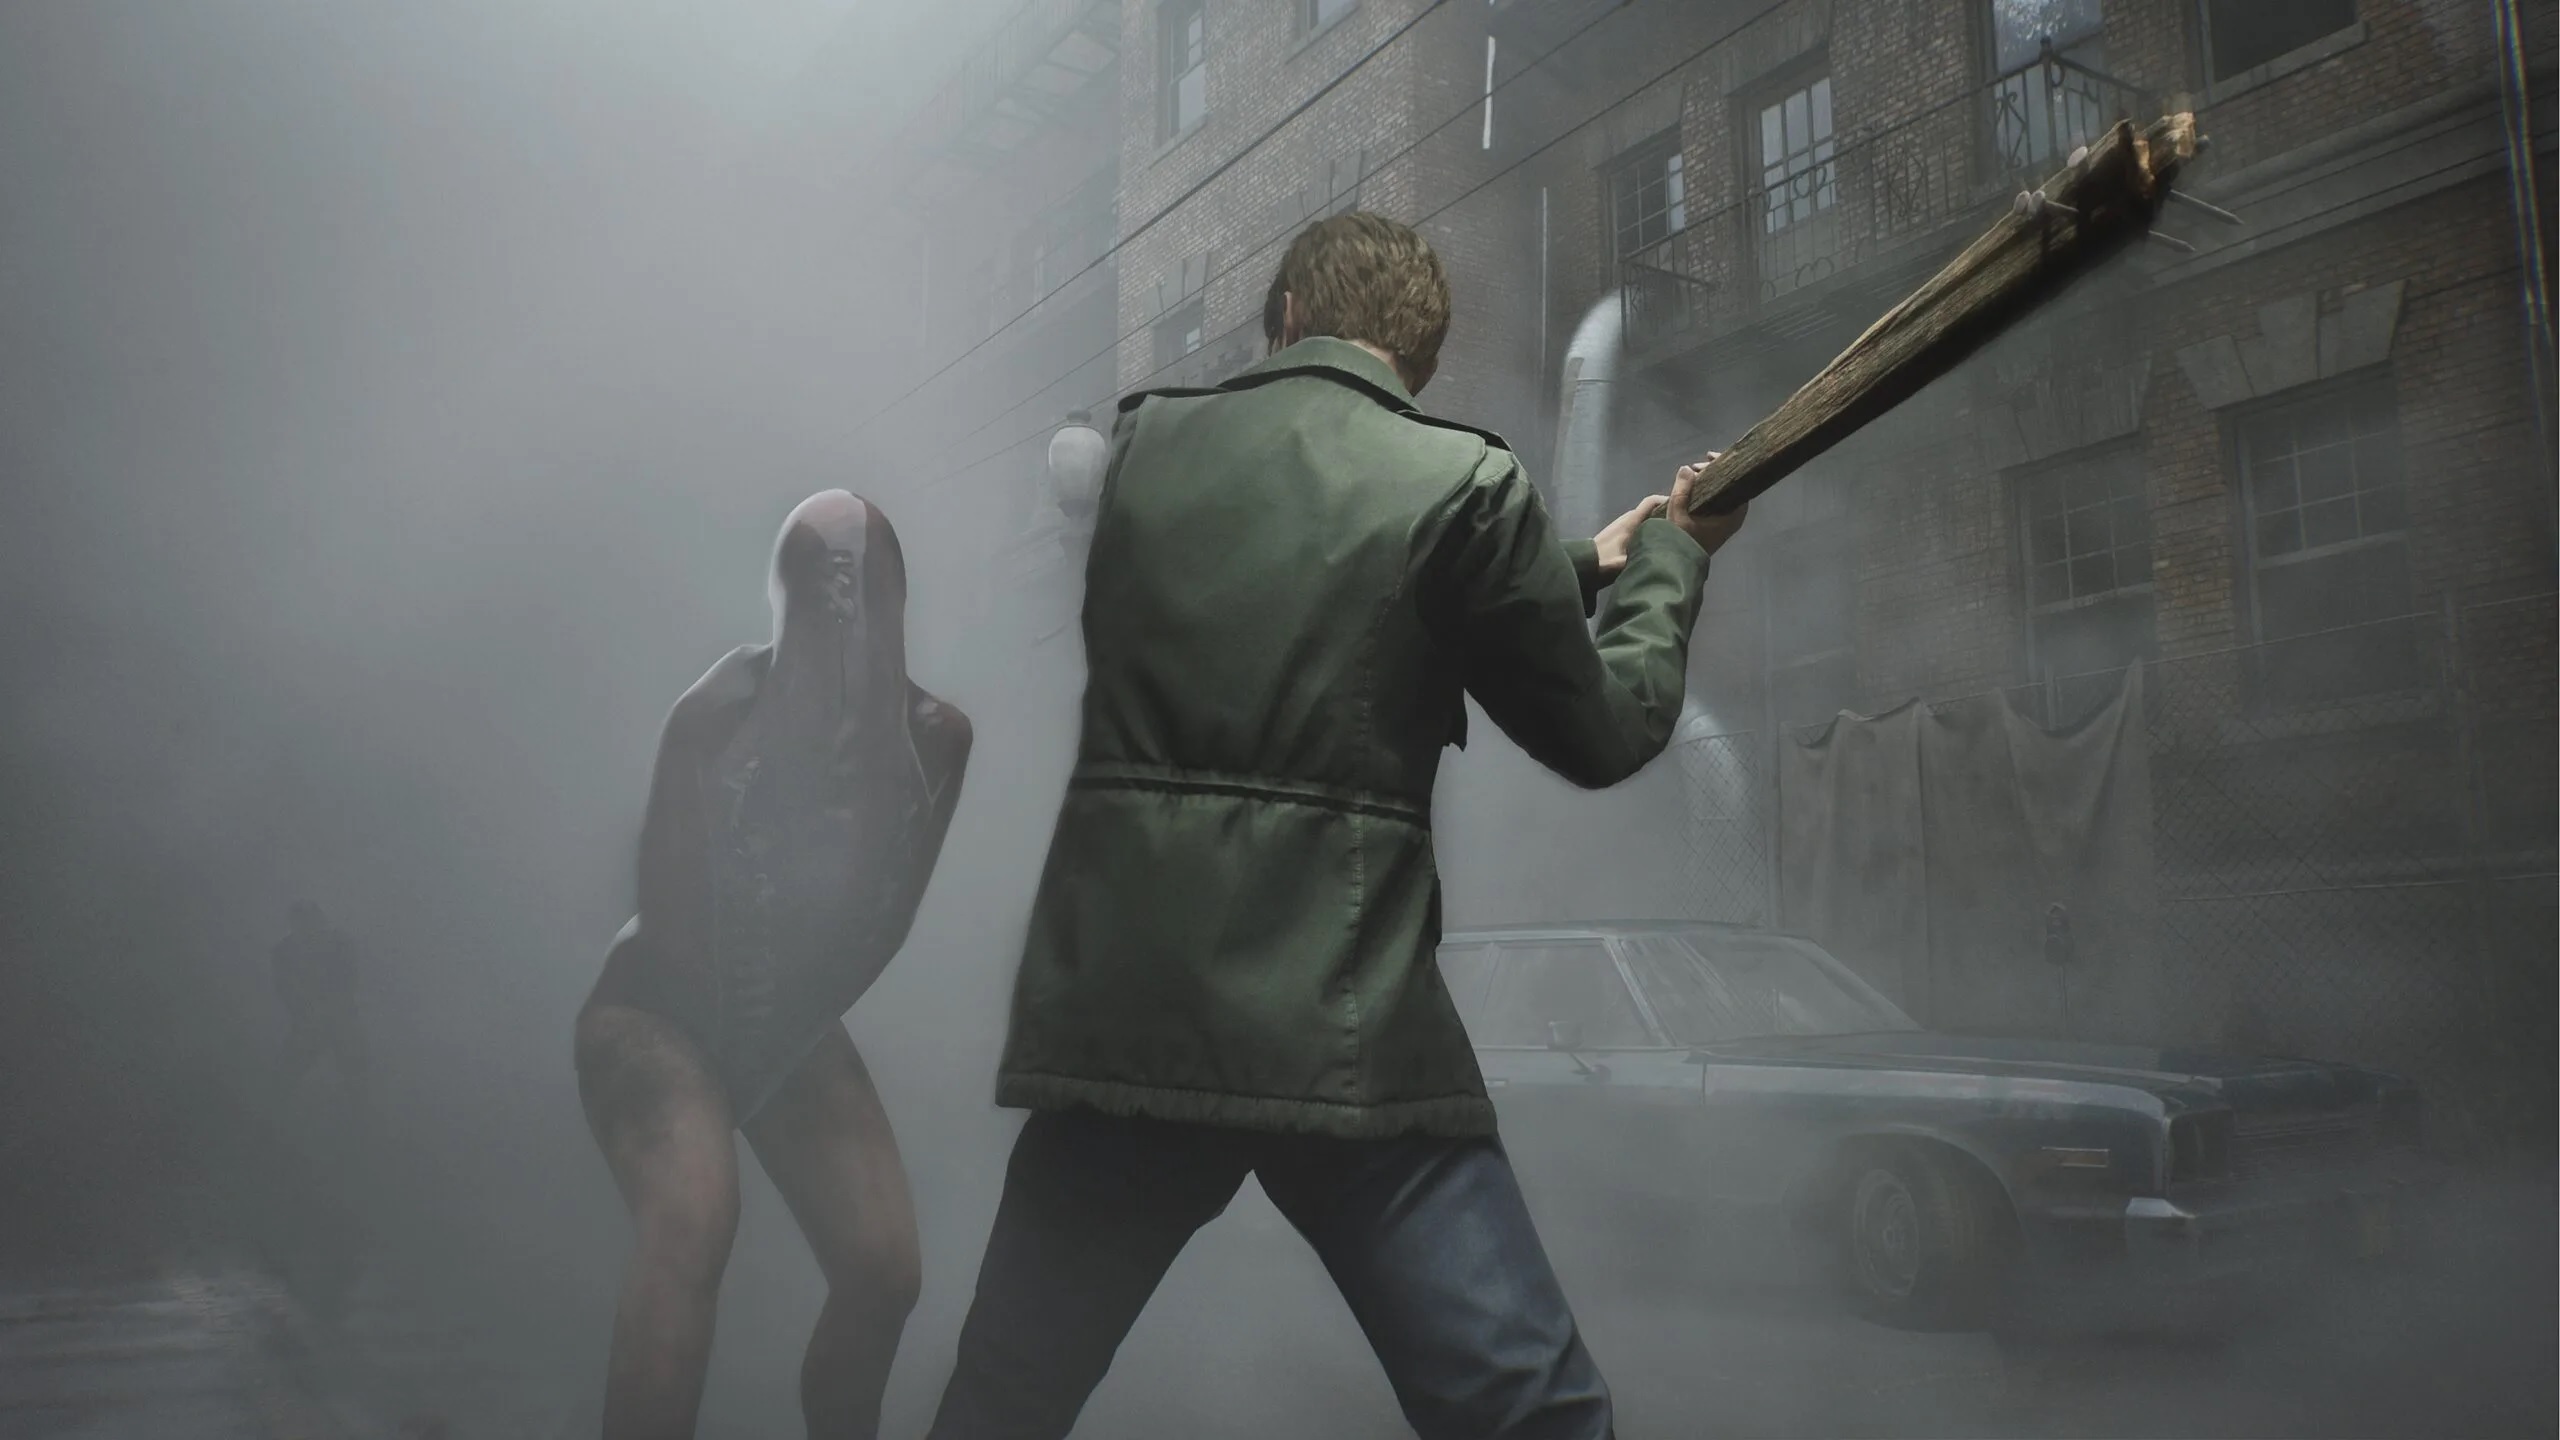 Silent Hill 2 remake officially revealed (as a PS5 console exclusive) -  Yahoo Sports